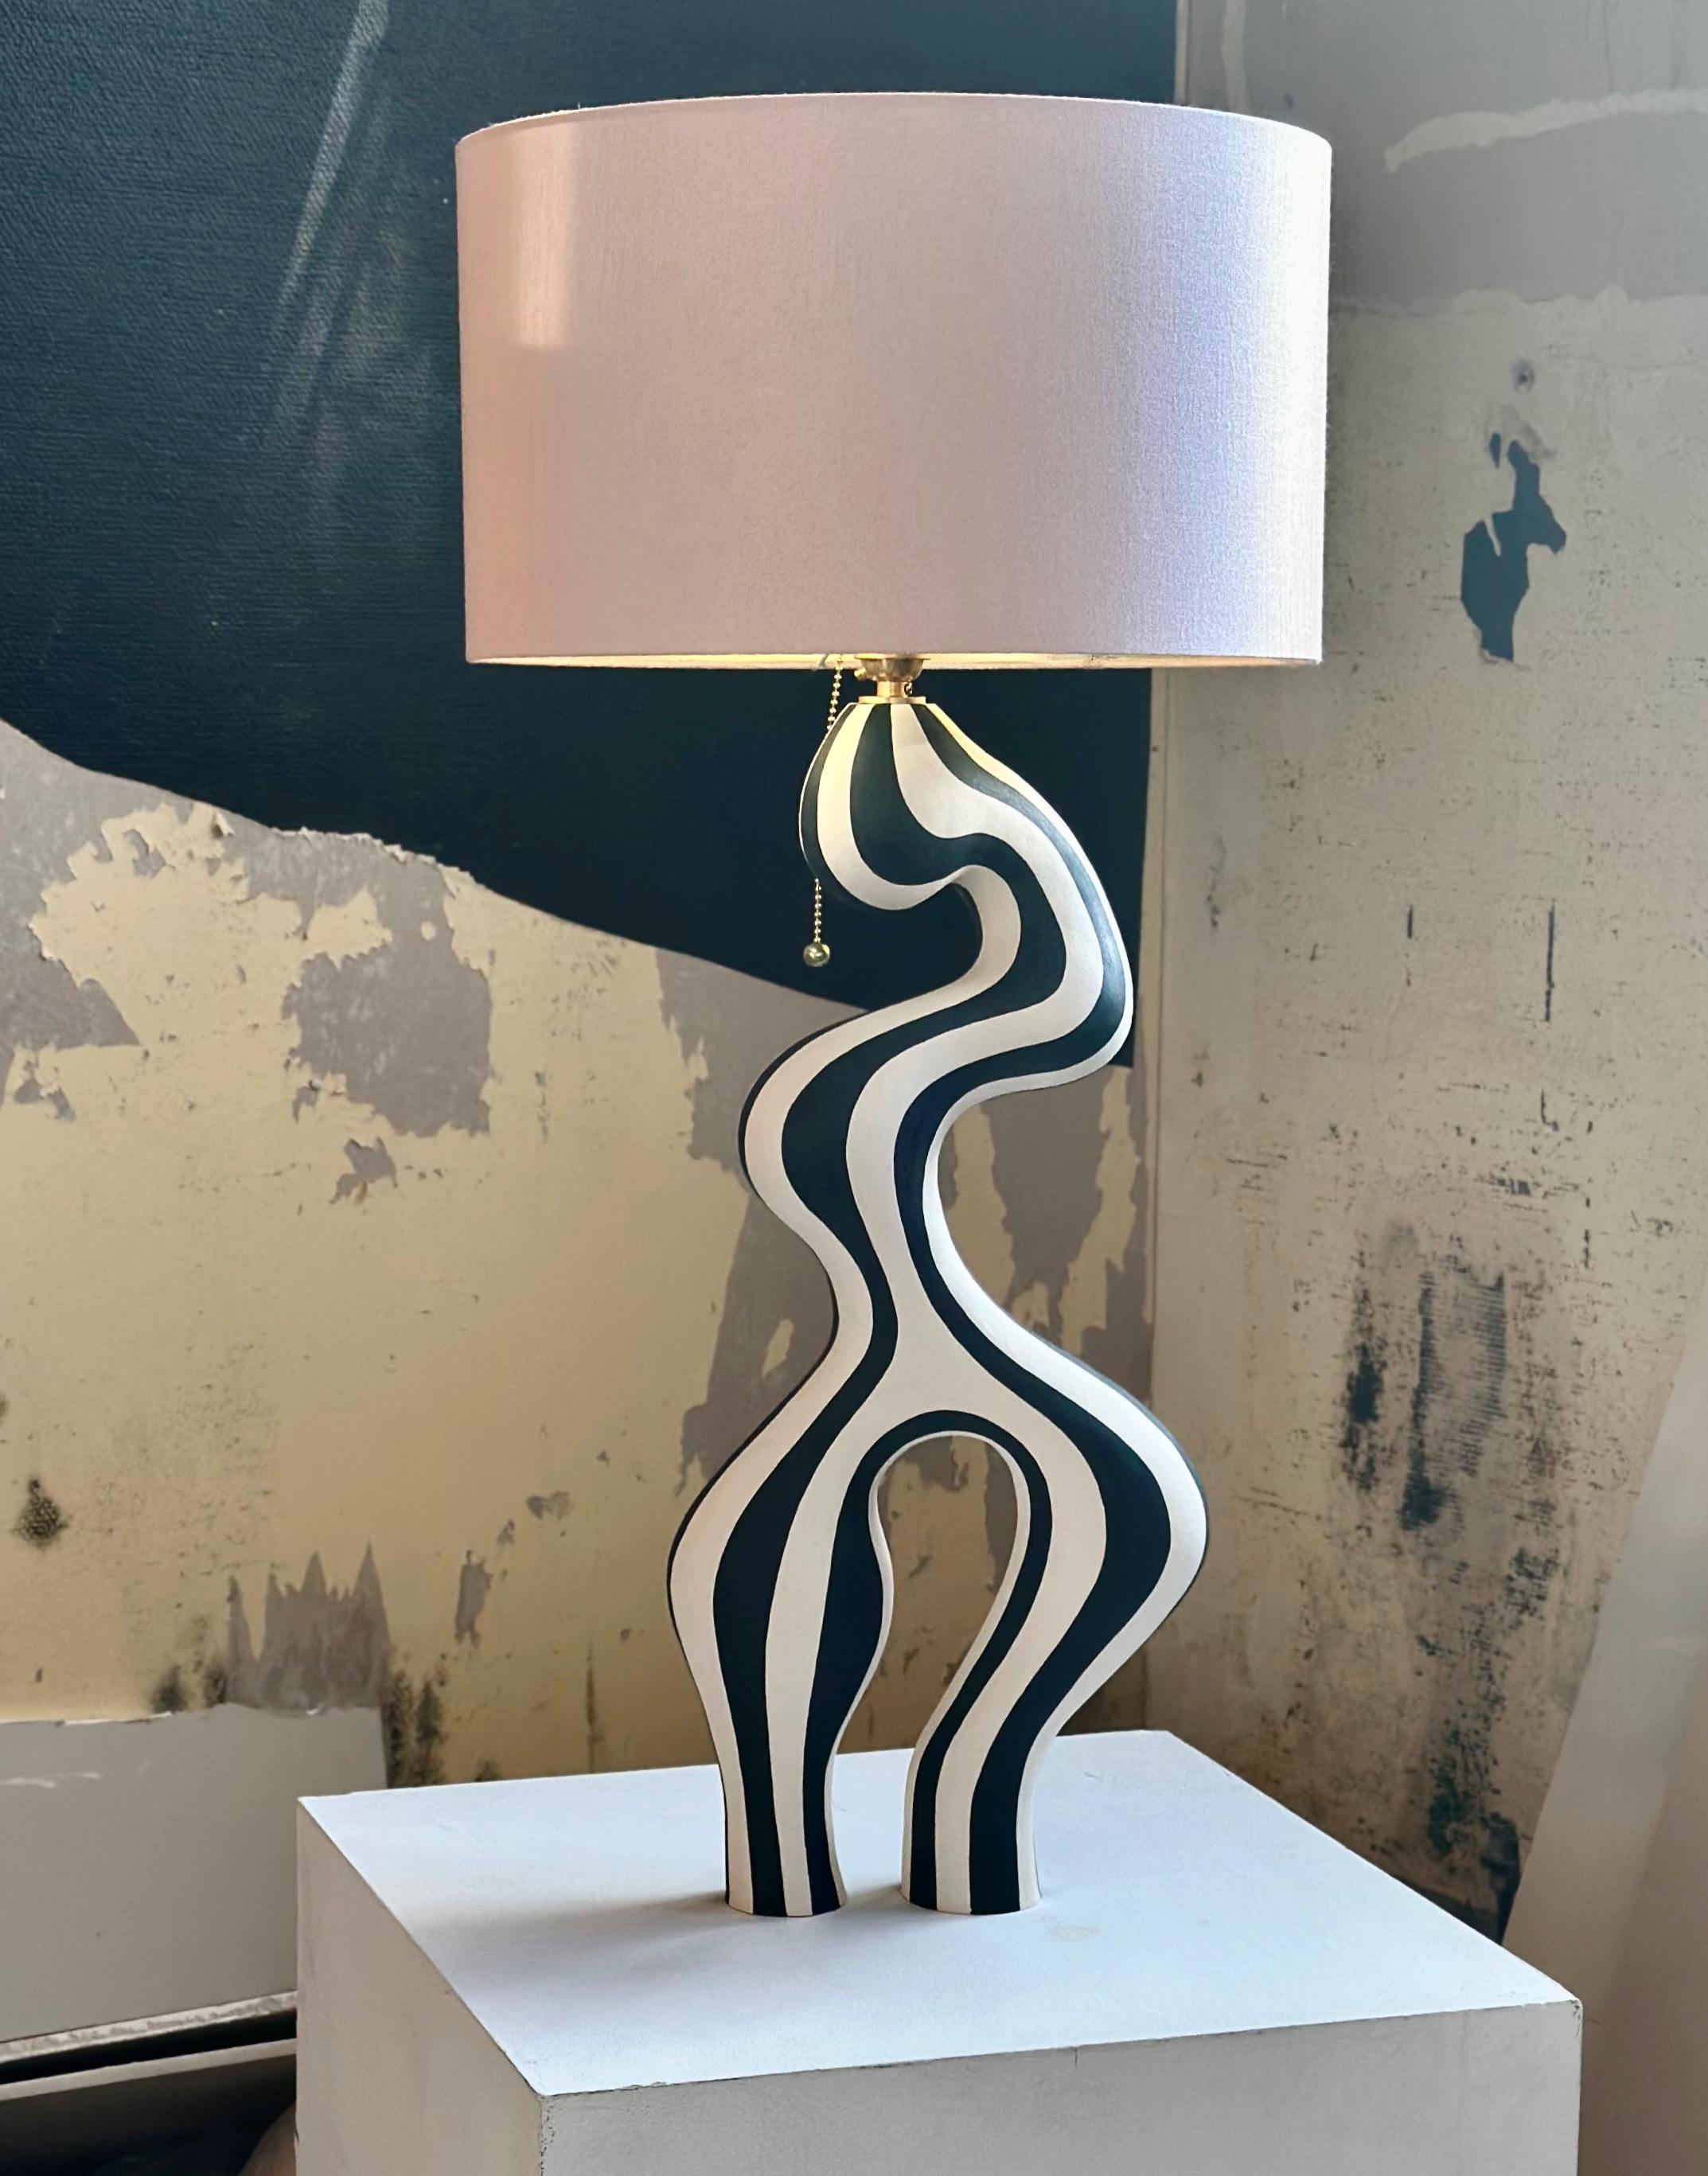 Crafted by hand: ceramic table lamp by Norwegian artist Jossolini 1